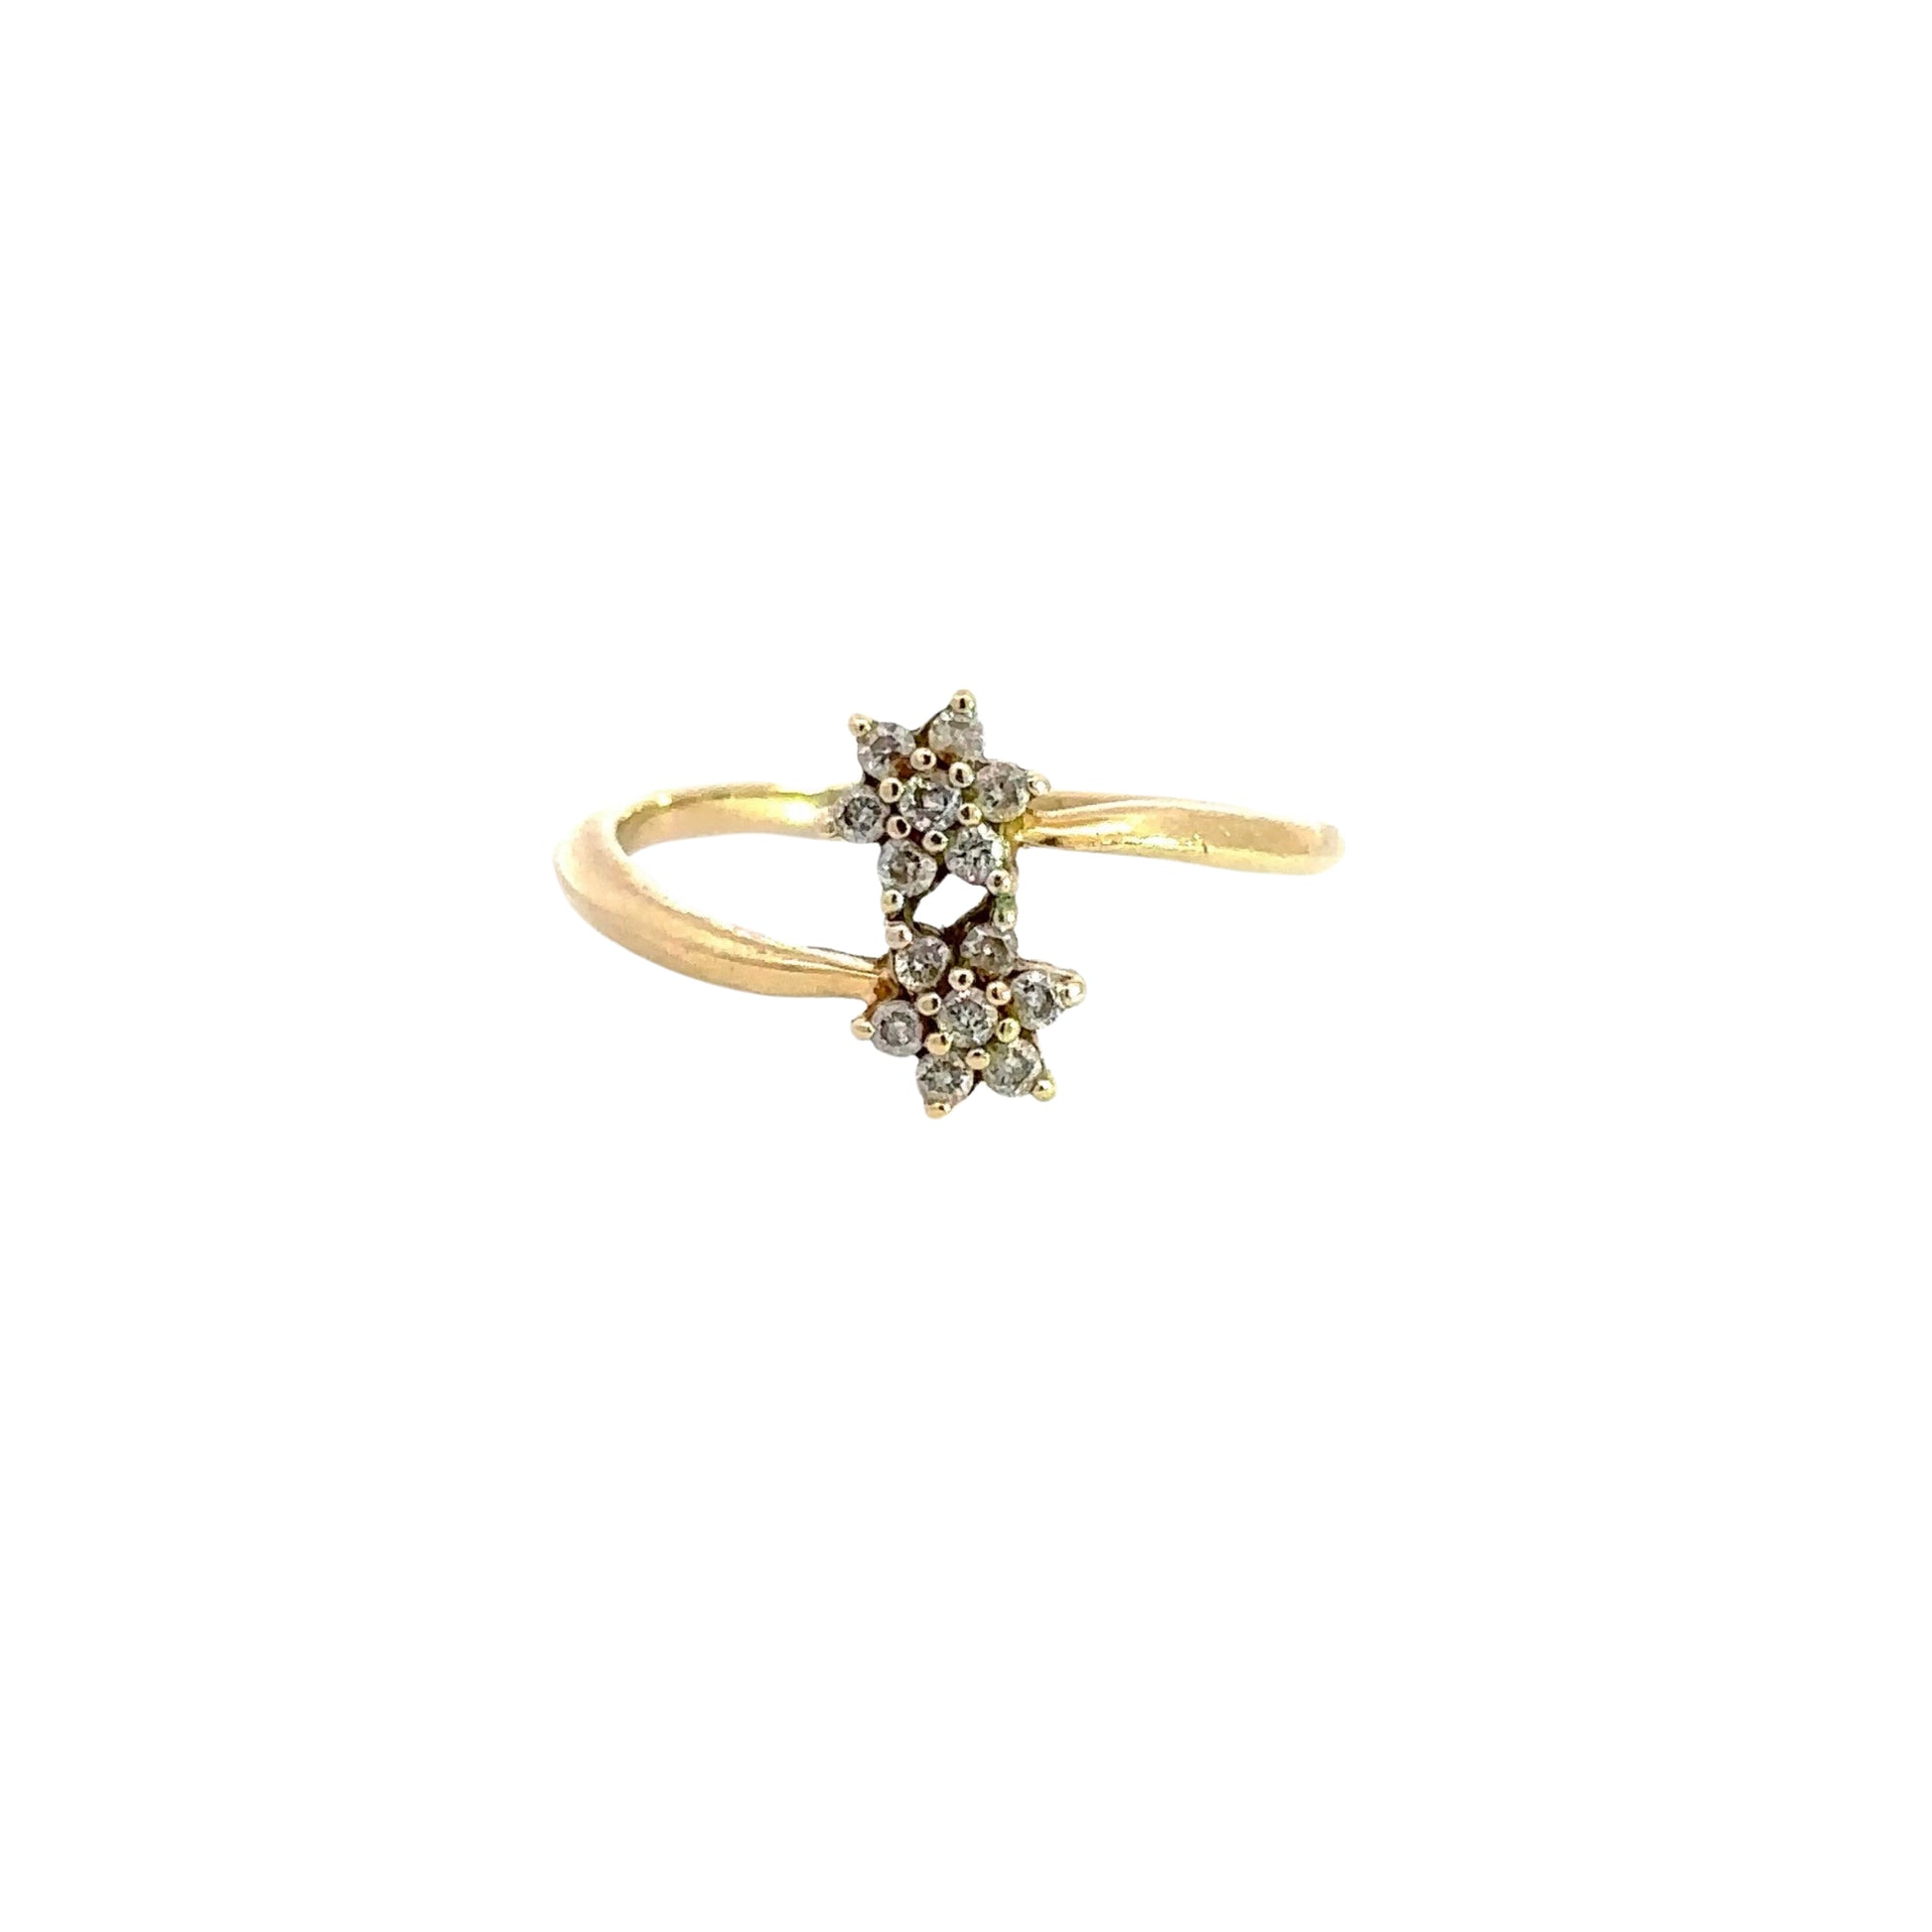 Front of ring with 2 diamond sunflowers with 7 small diamonds each